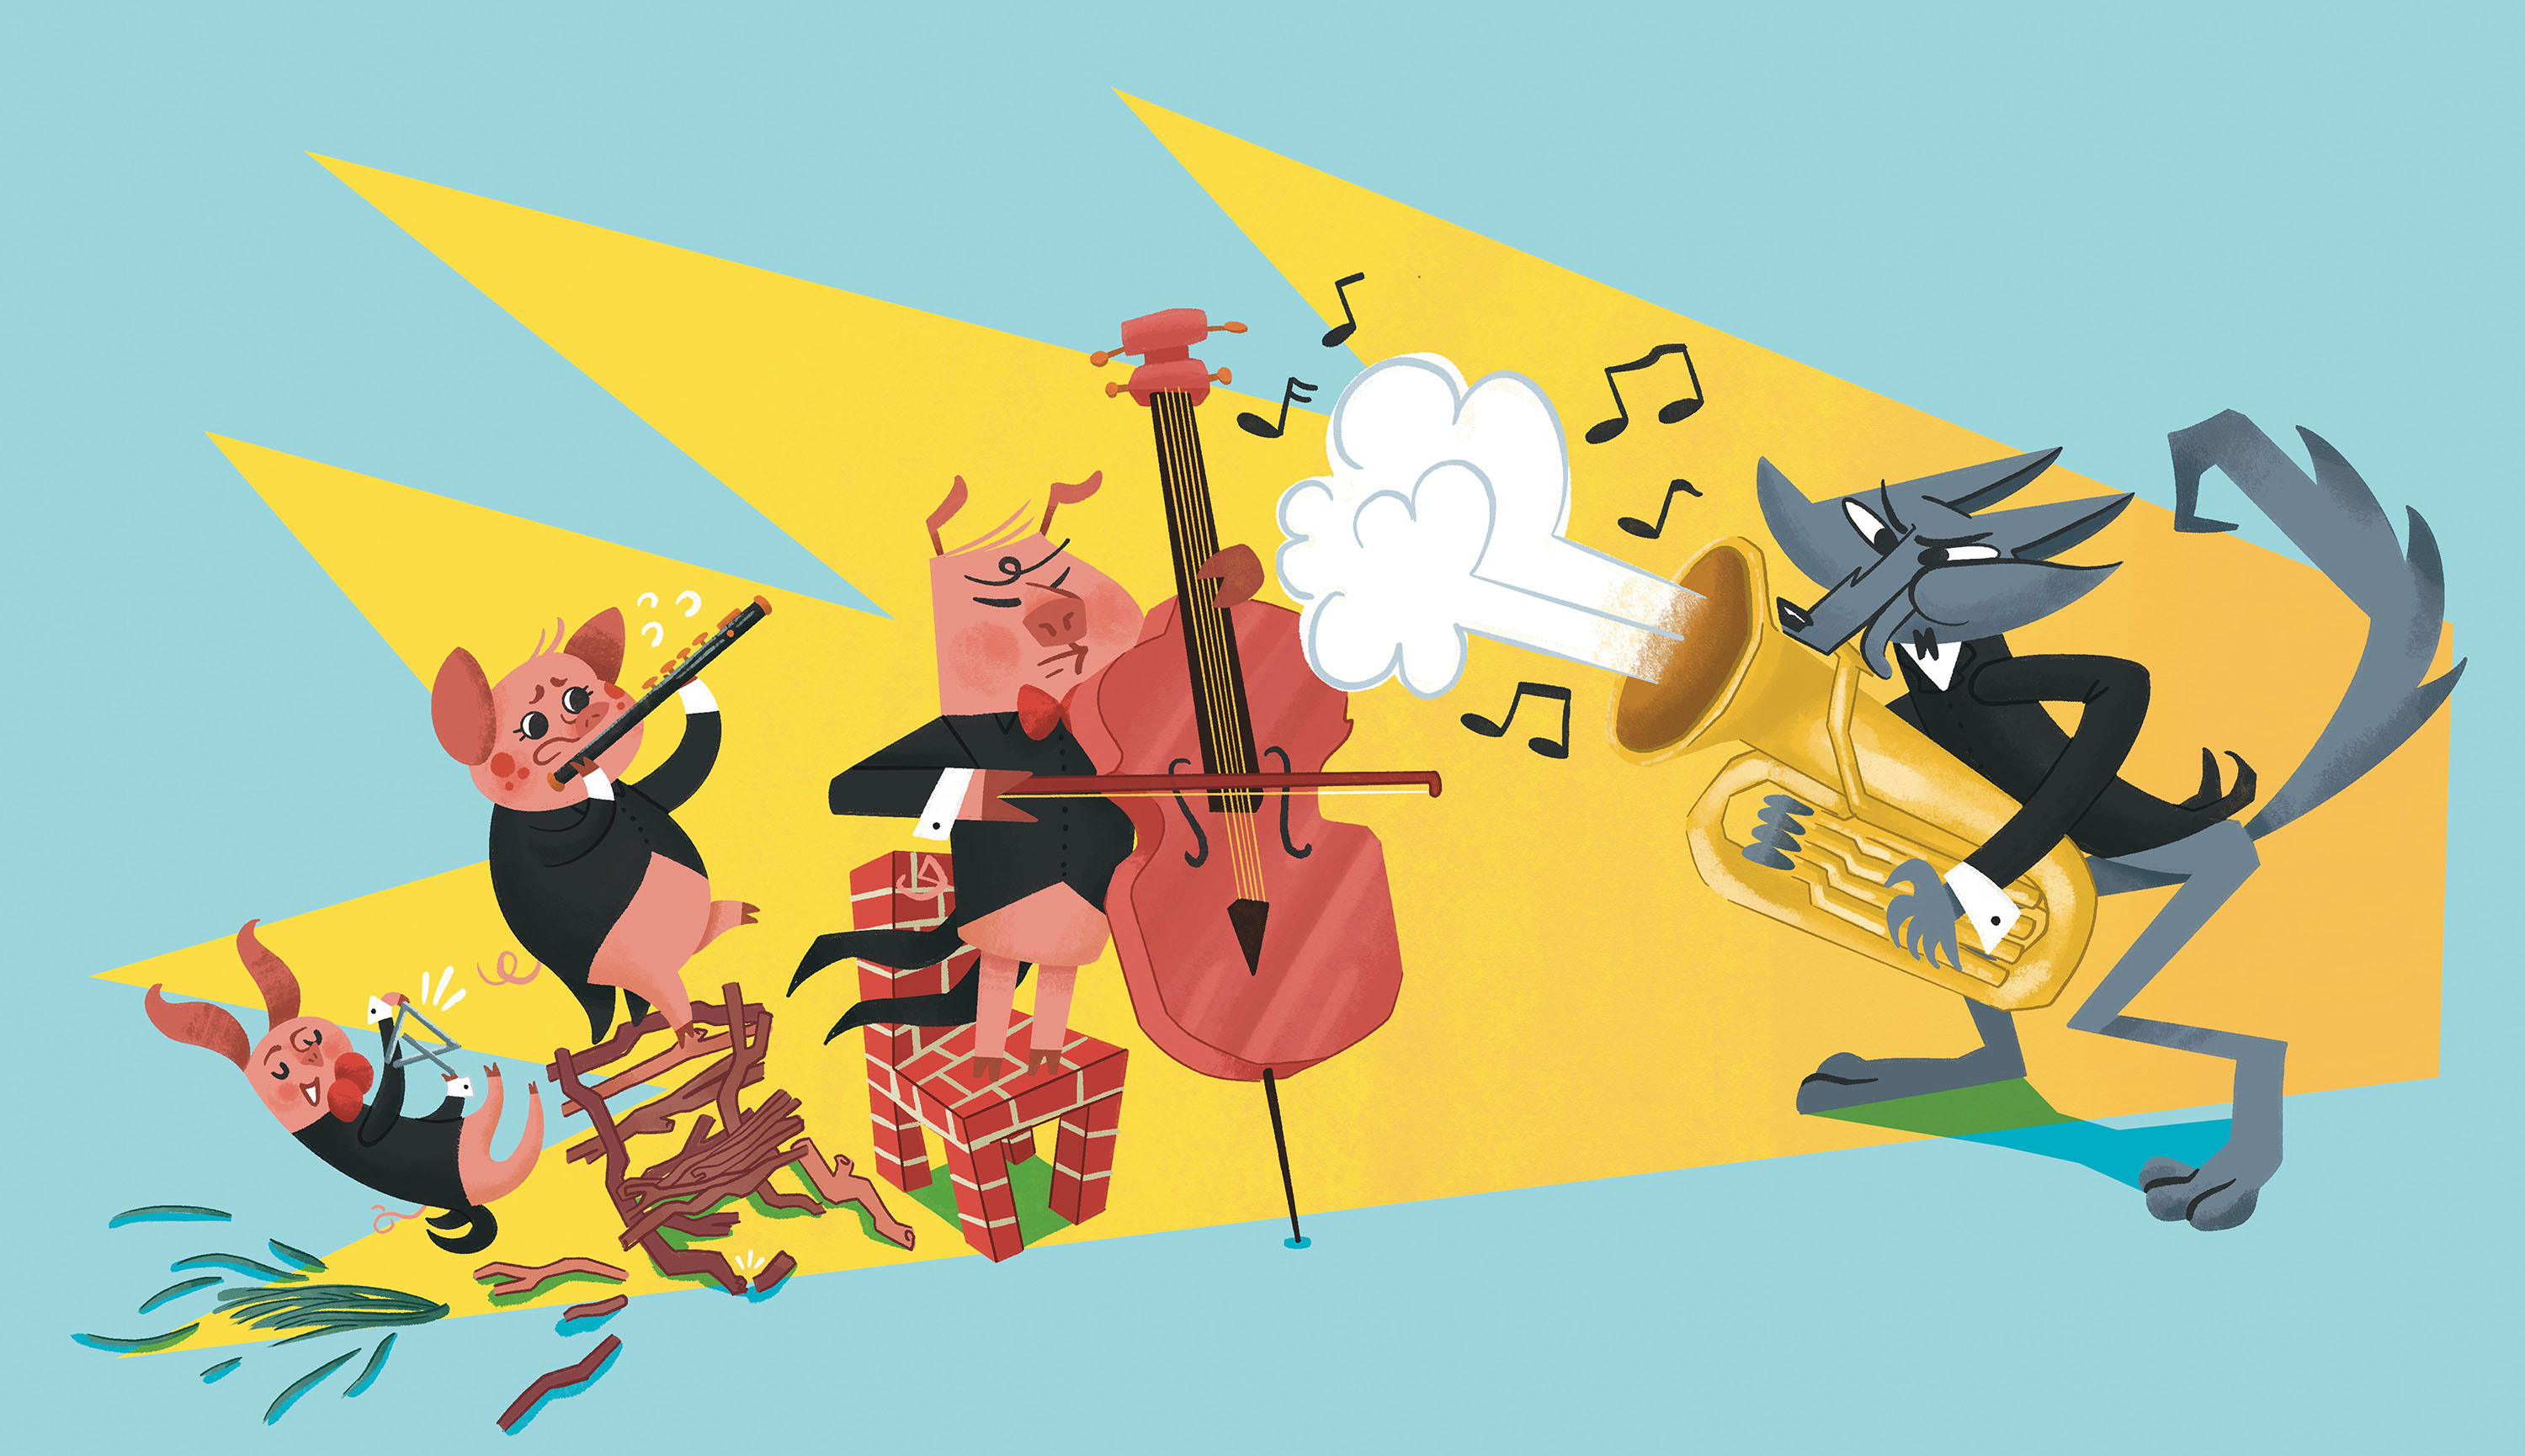 An illustration of the Big Bad Wolf and the Three Little Pigs playing instruments.